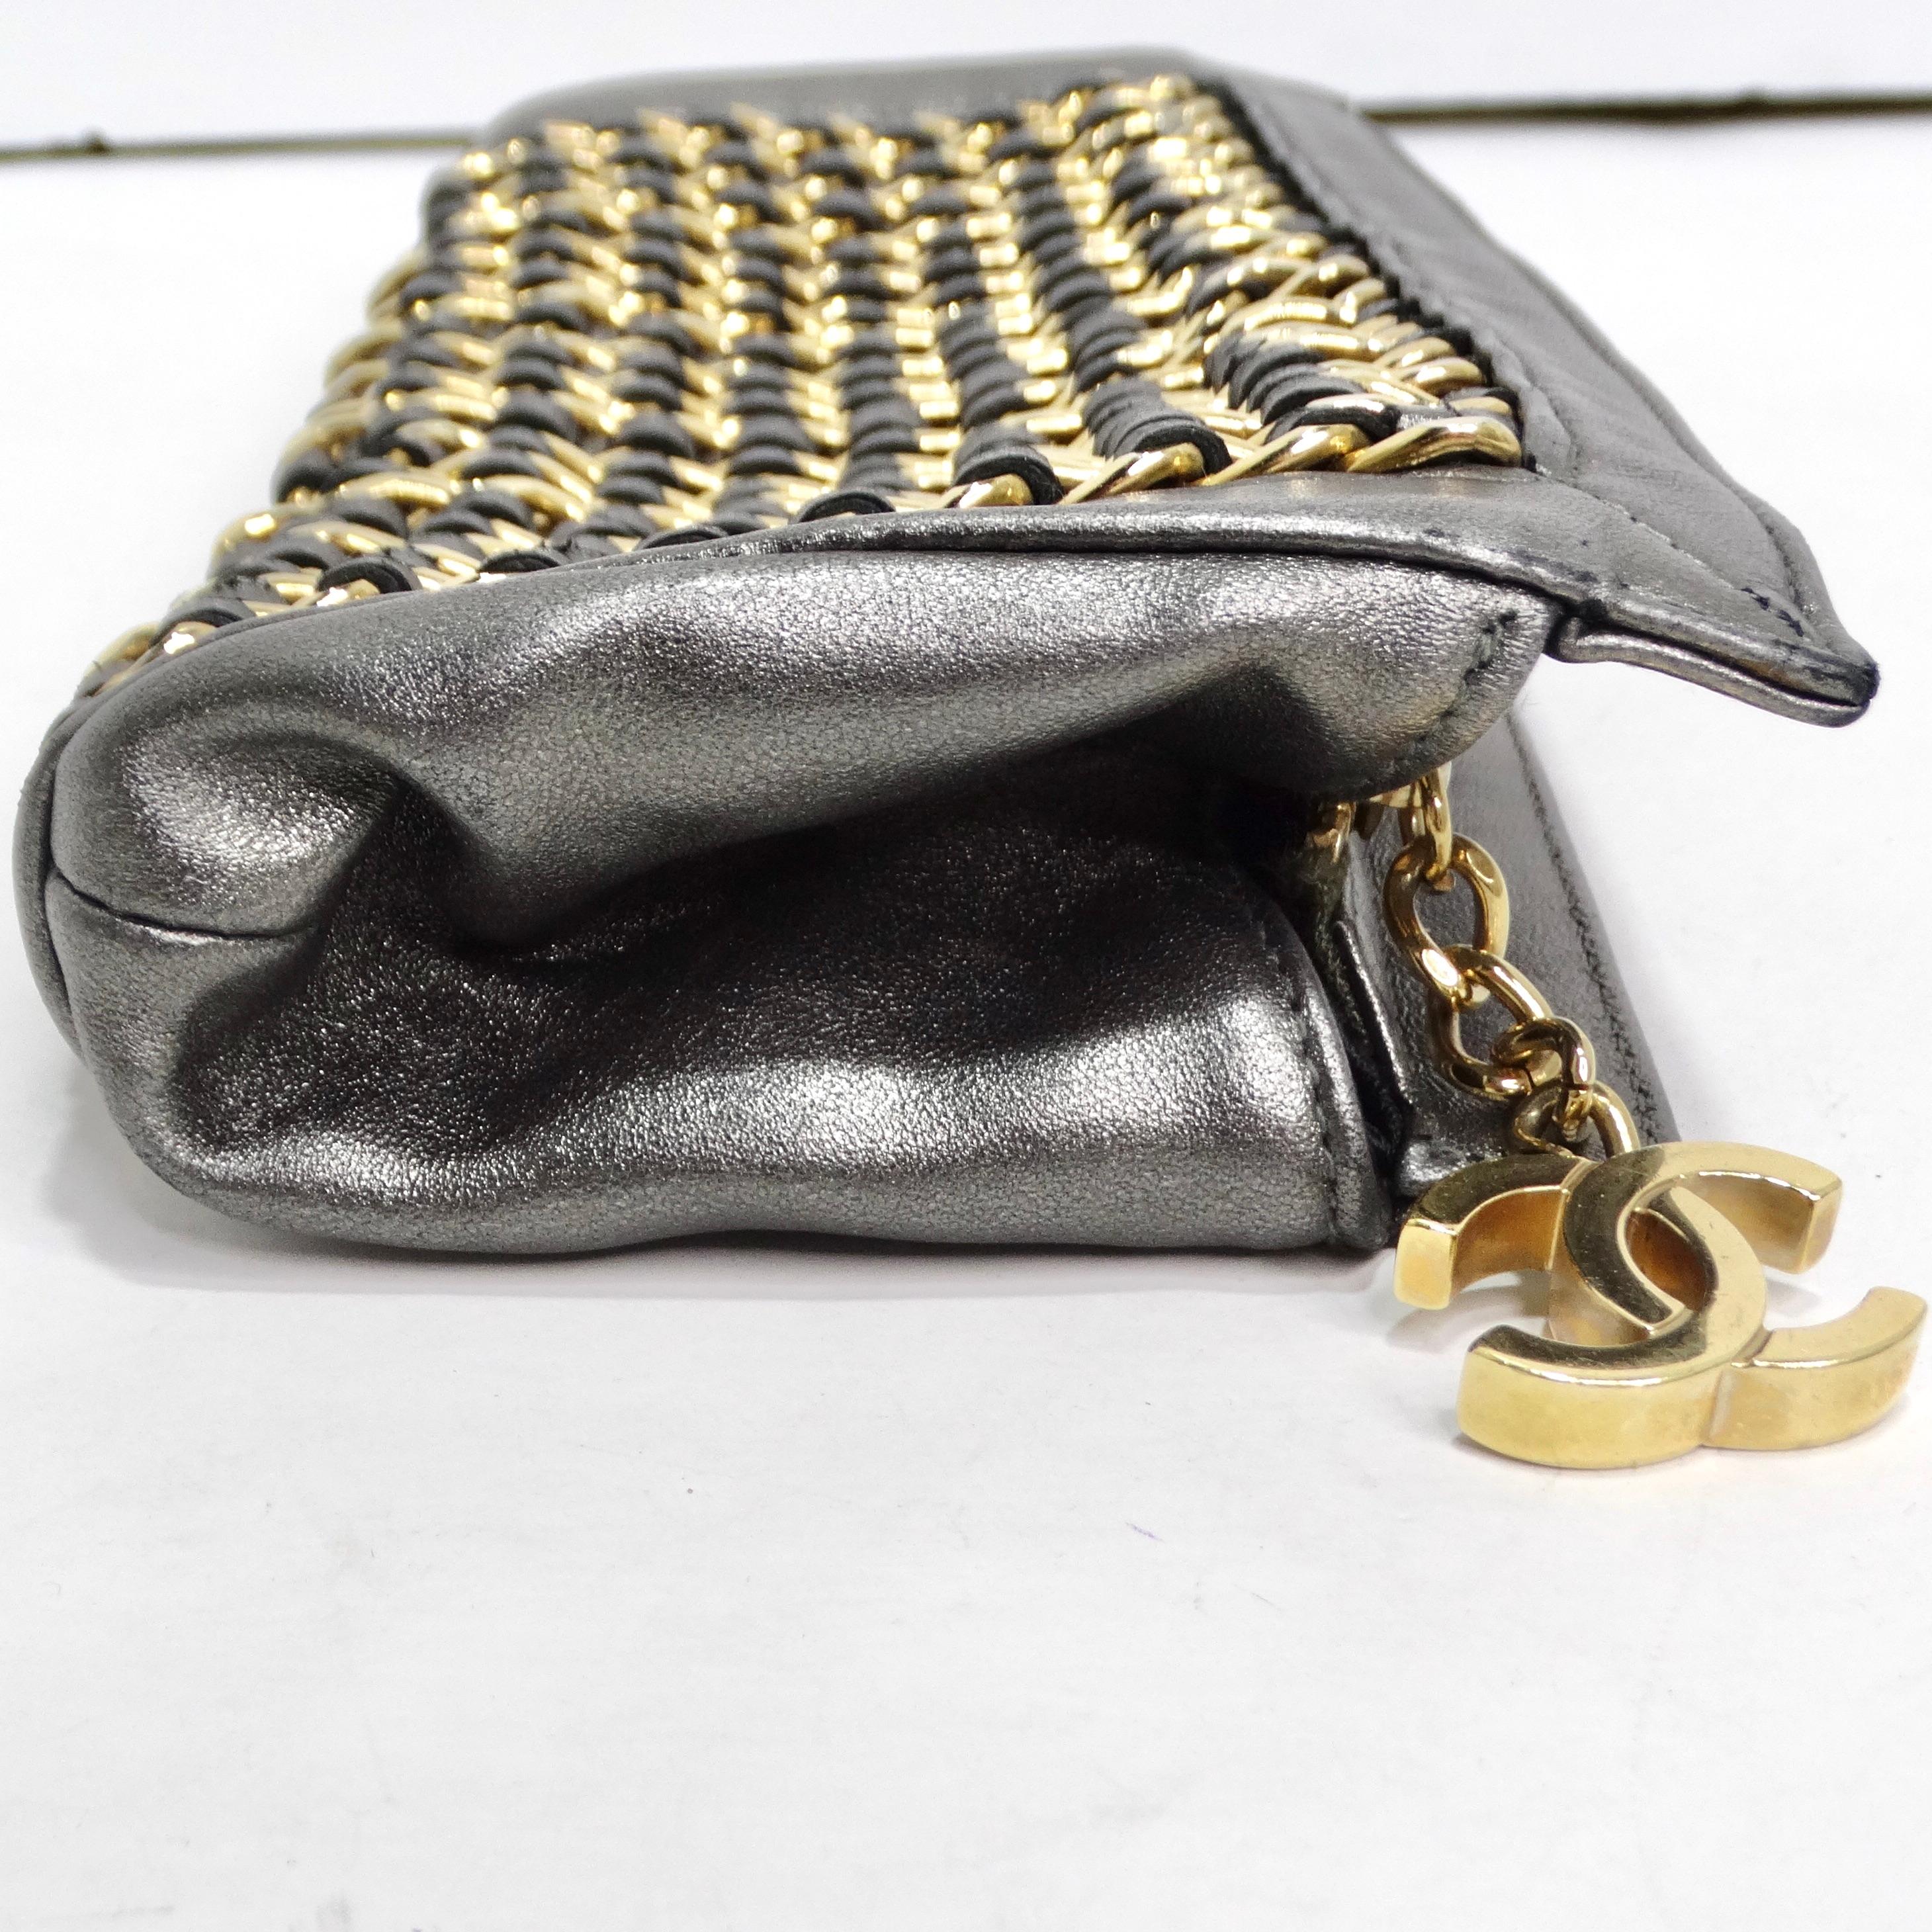 Chanel Lambskin Chain Embellished Clutch For Sale 5